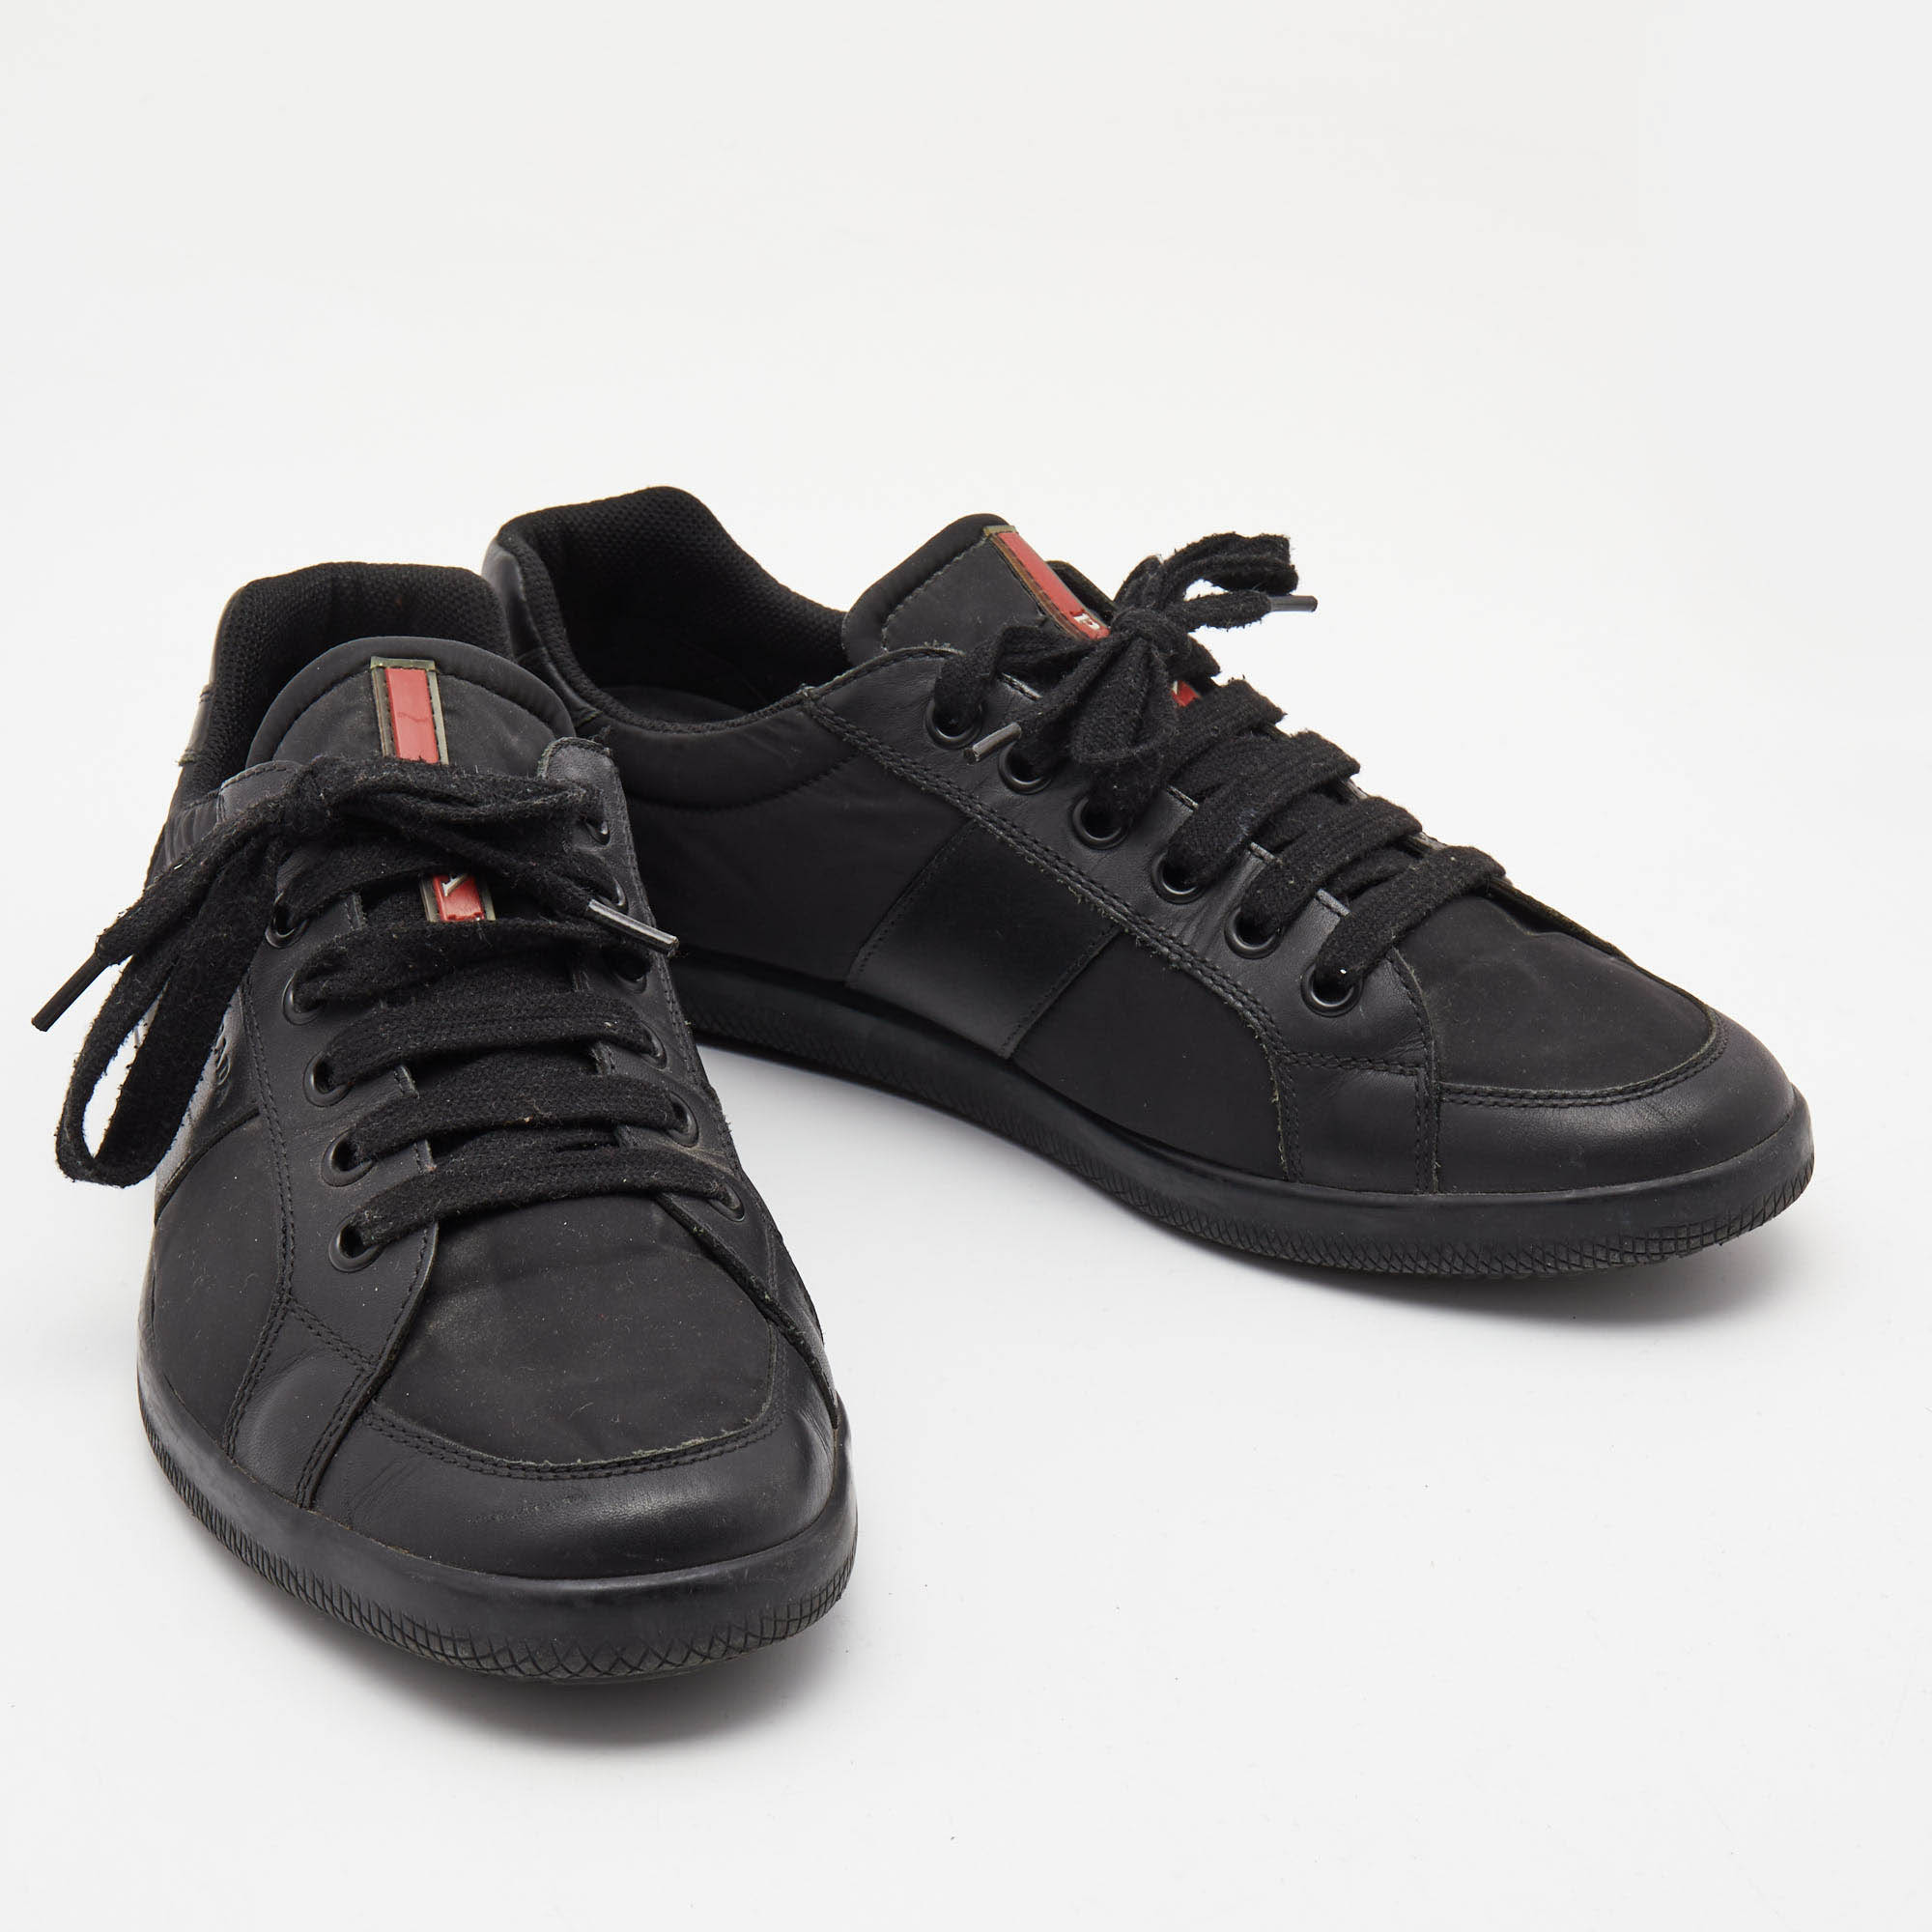 Prada Black Leather And Nyon Low Top Sneakers Size 44